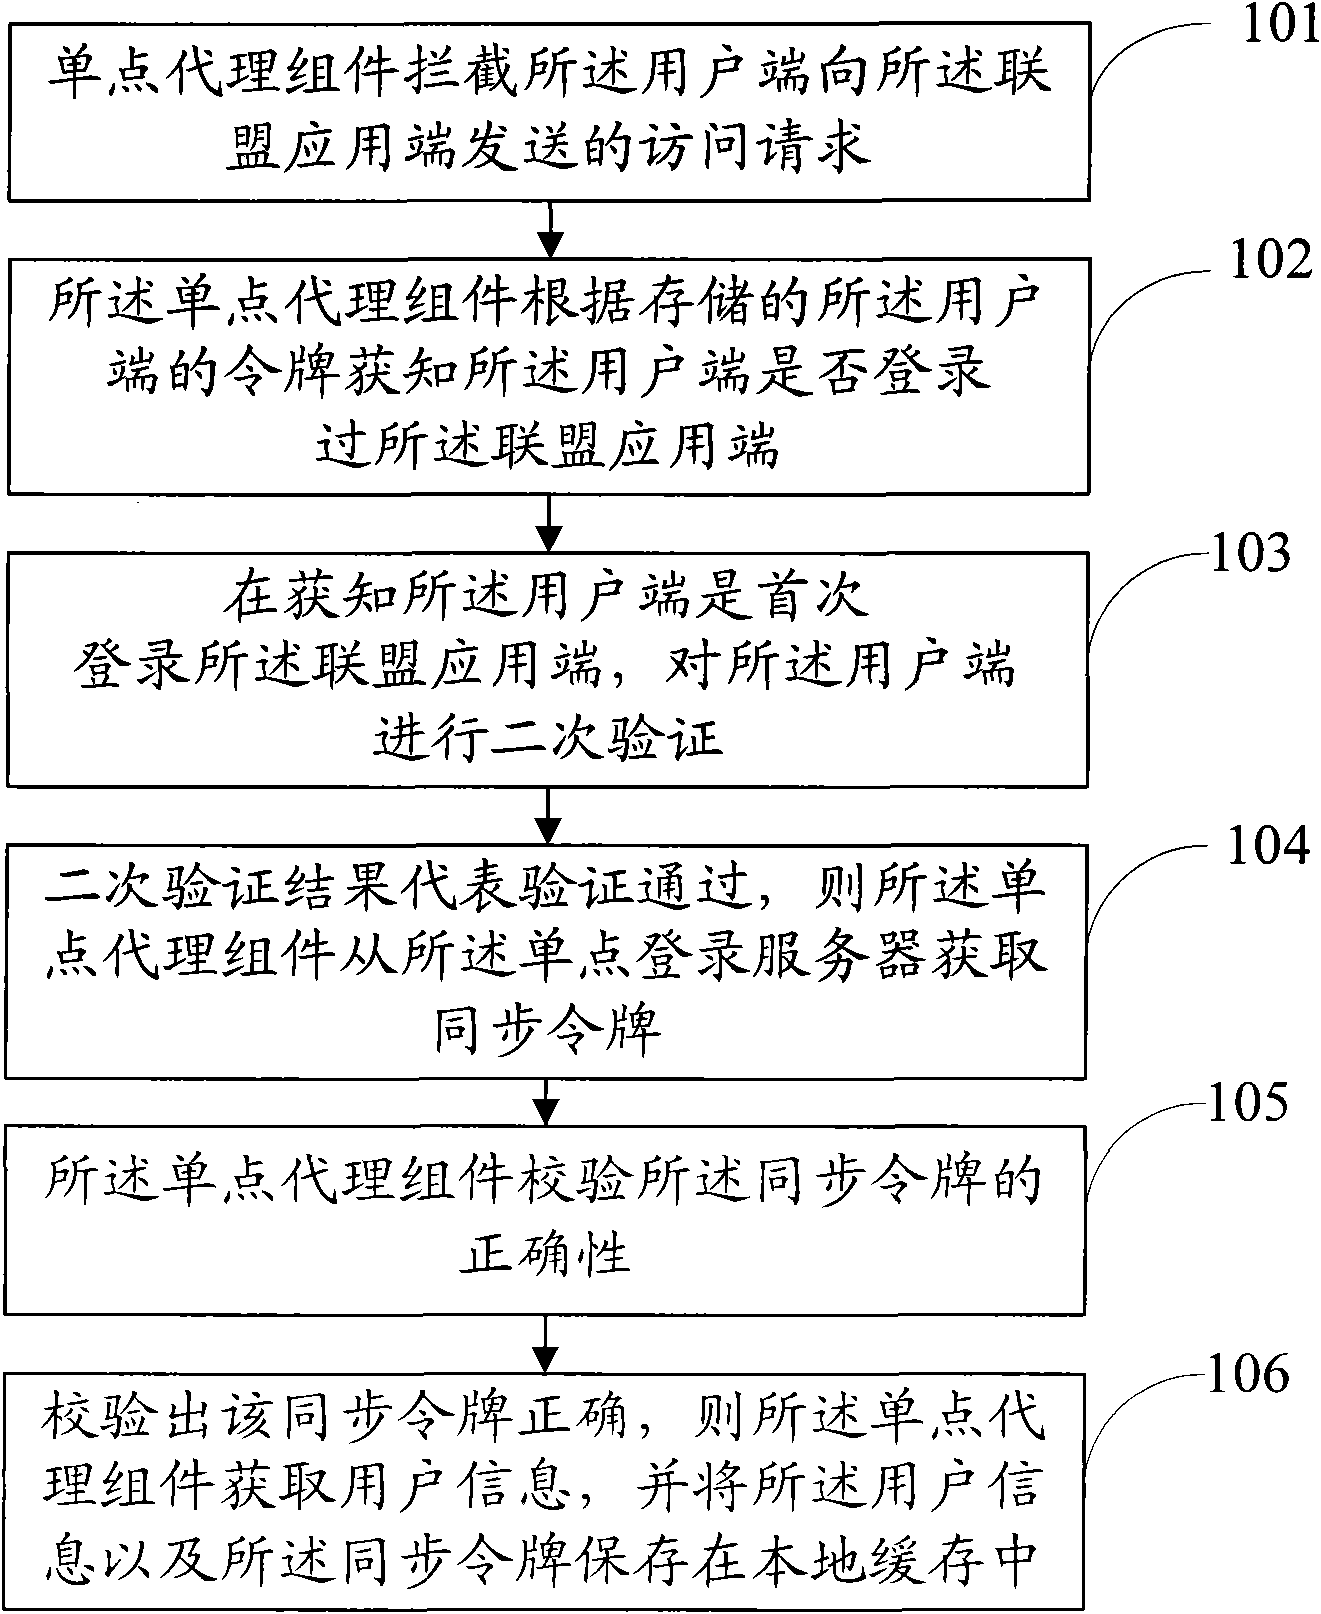 Cross-domain name single sign on and off method and system as well as corresponding equipment